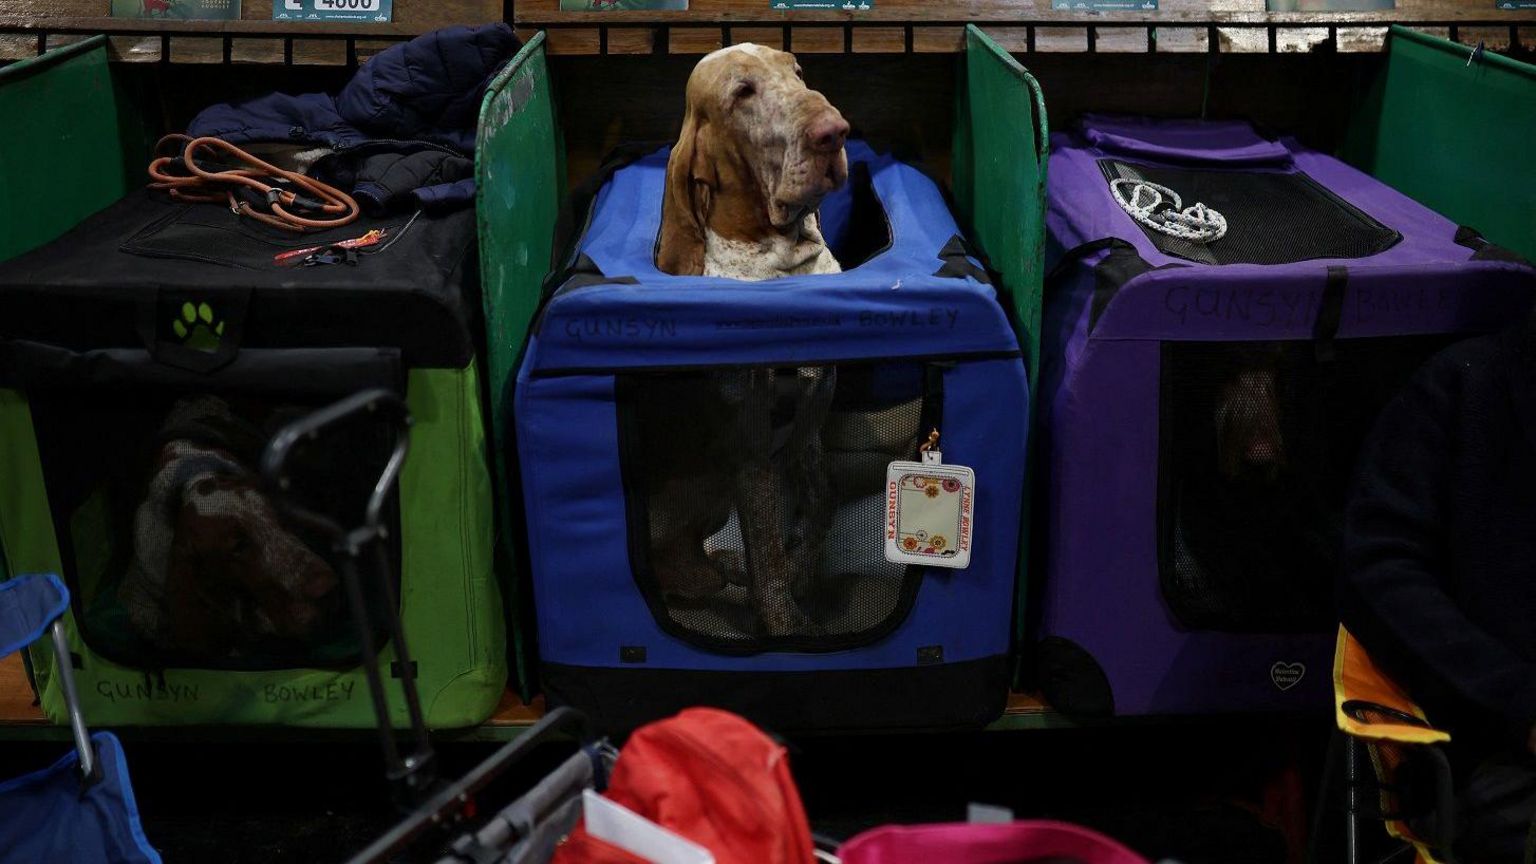 A Bracco Italiano dog pokes its head out of its box on the second day